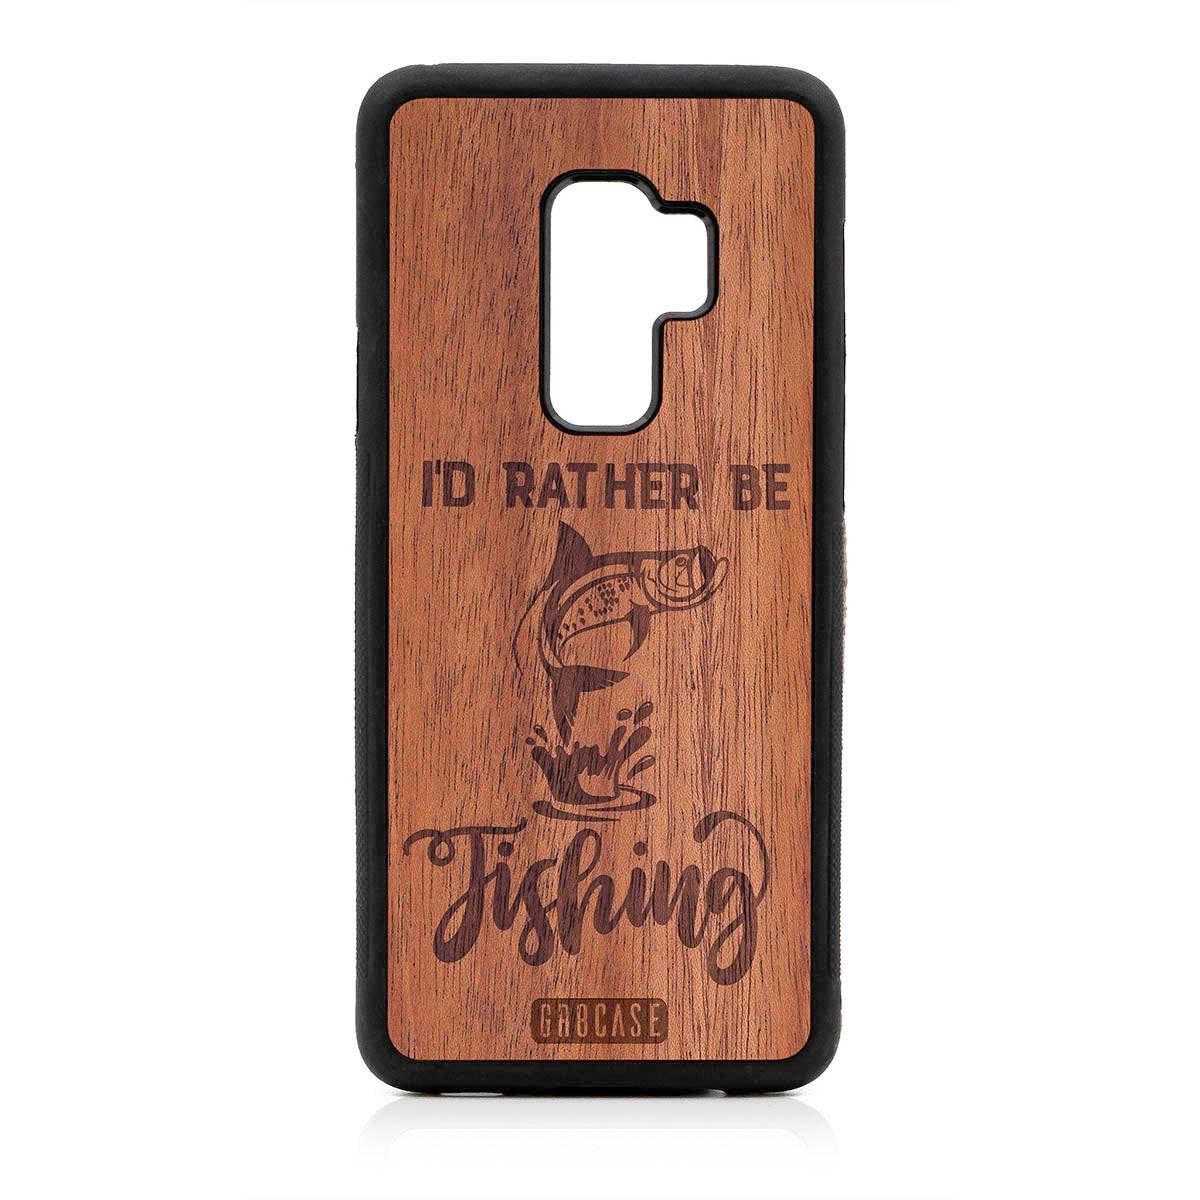 I'D Rather Be Fishing Design Wood Case For Samsung Galaxy S9 Plus